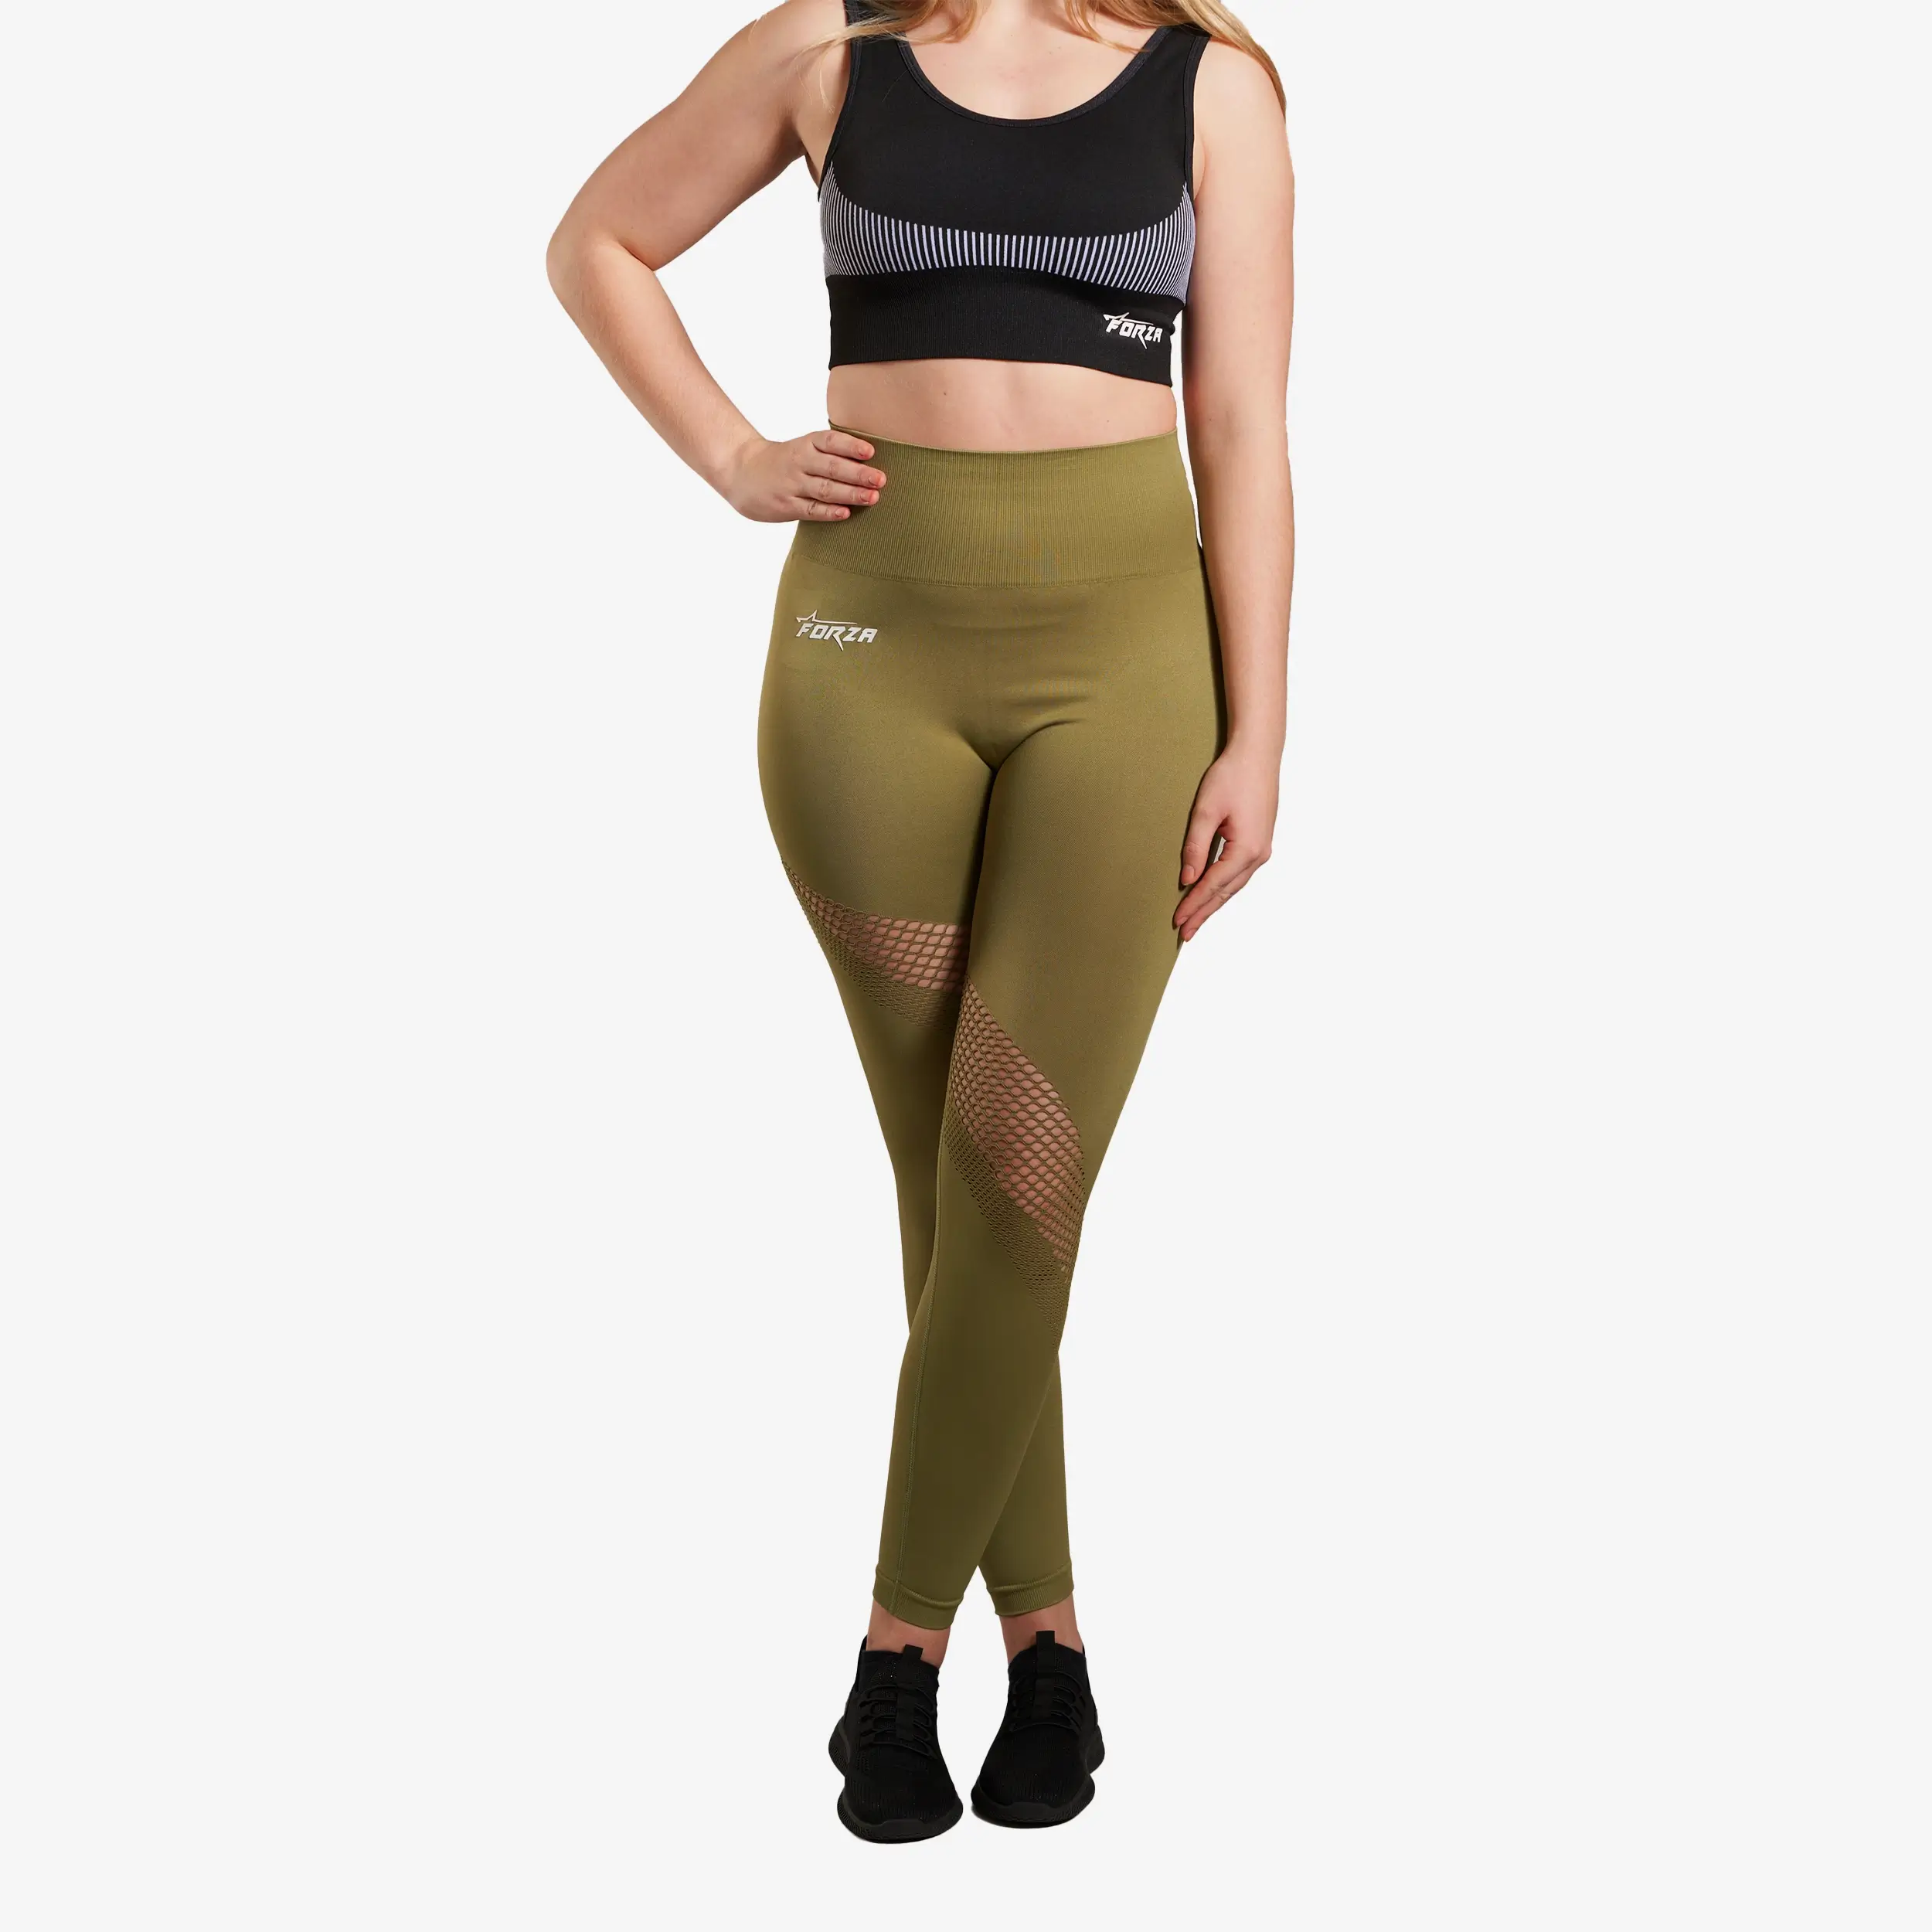 HOGE TAILLE LEGGINGS - ARMY GREEN